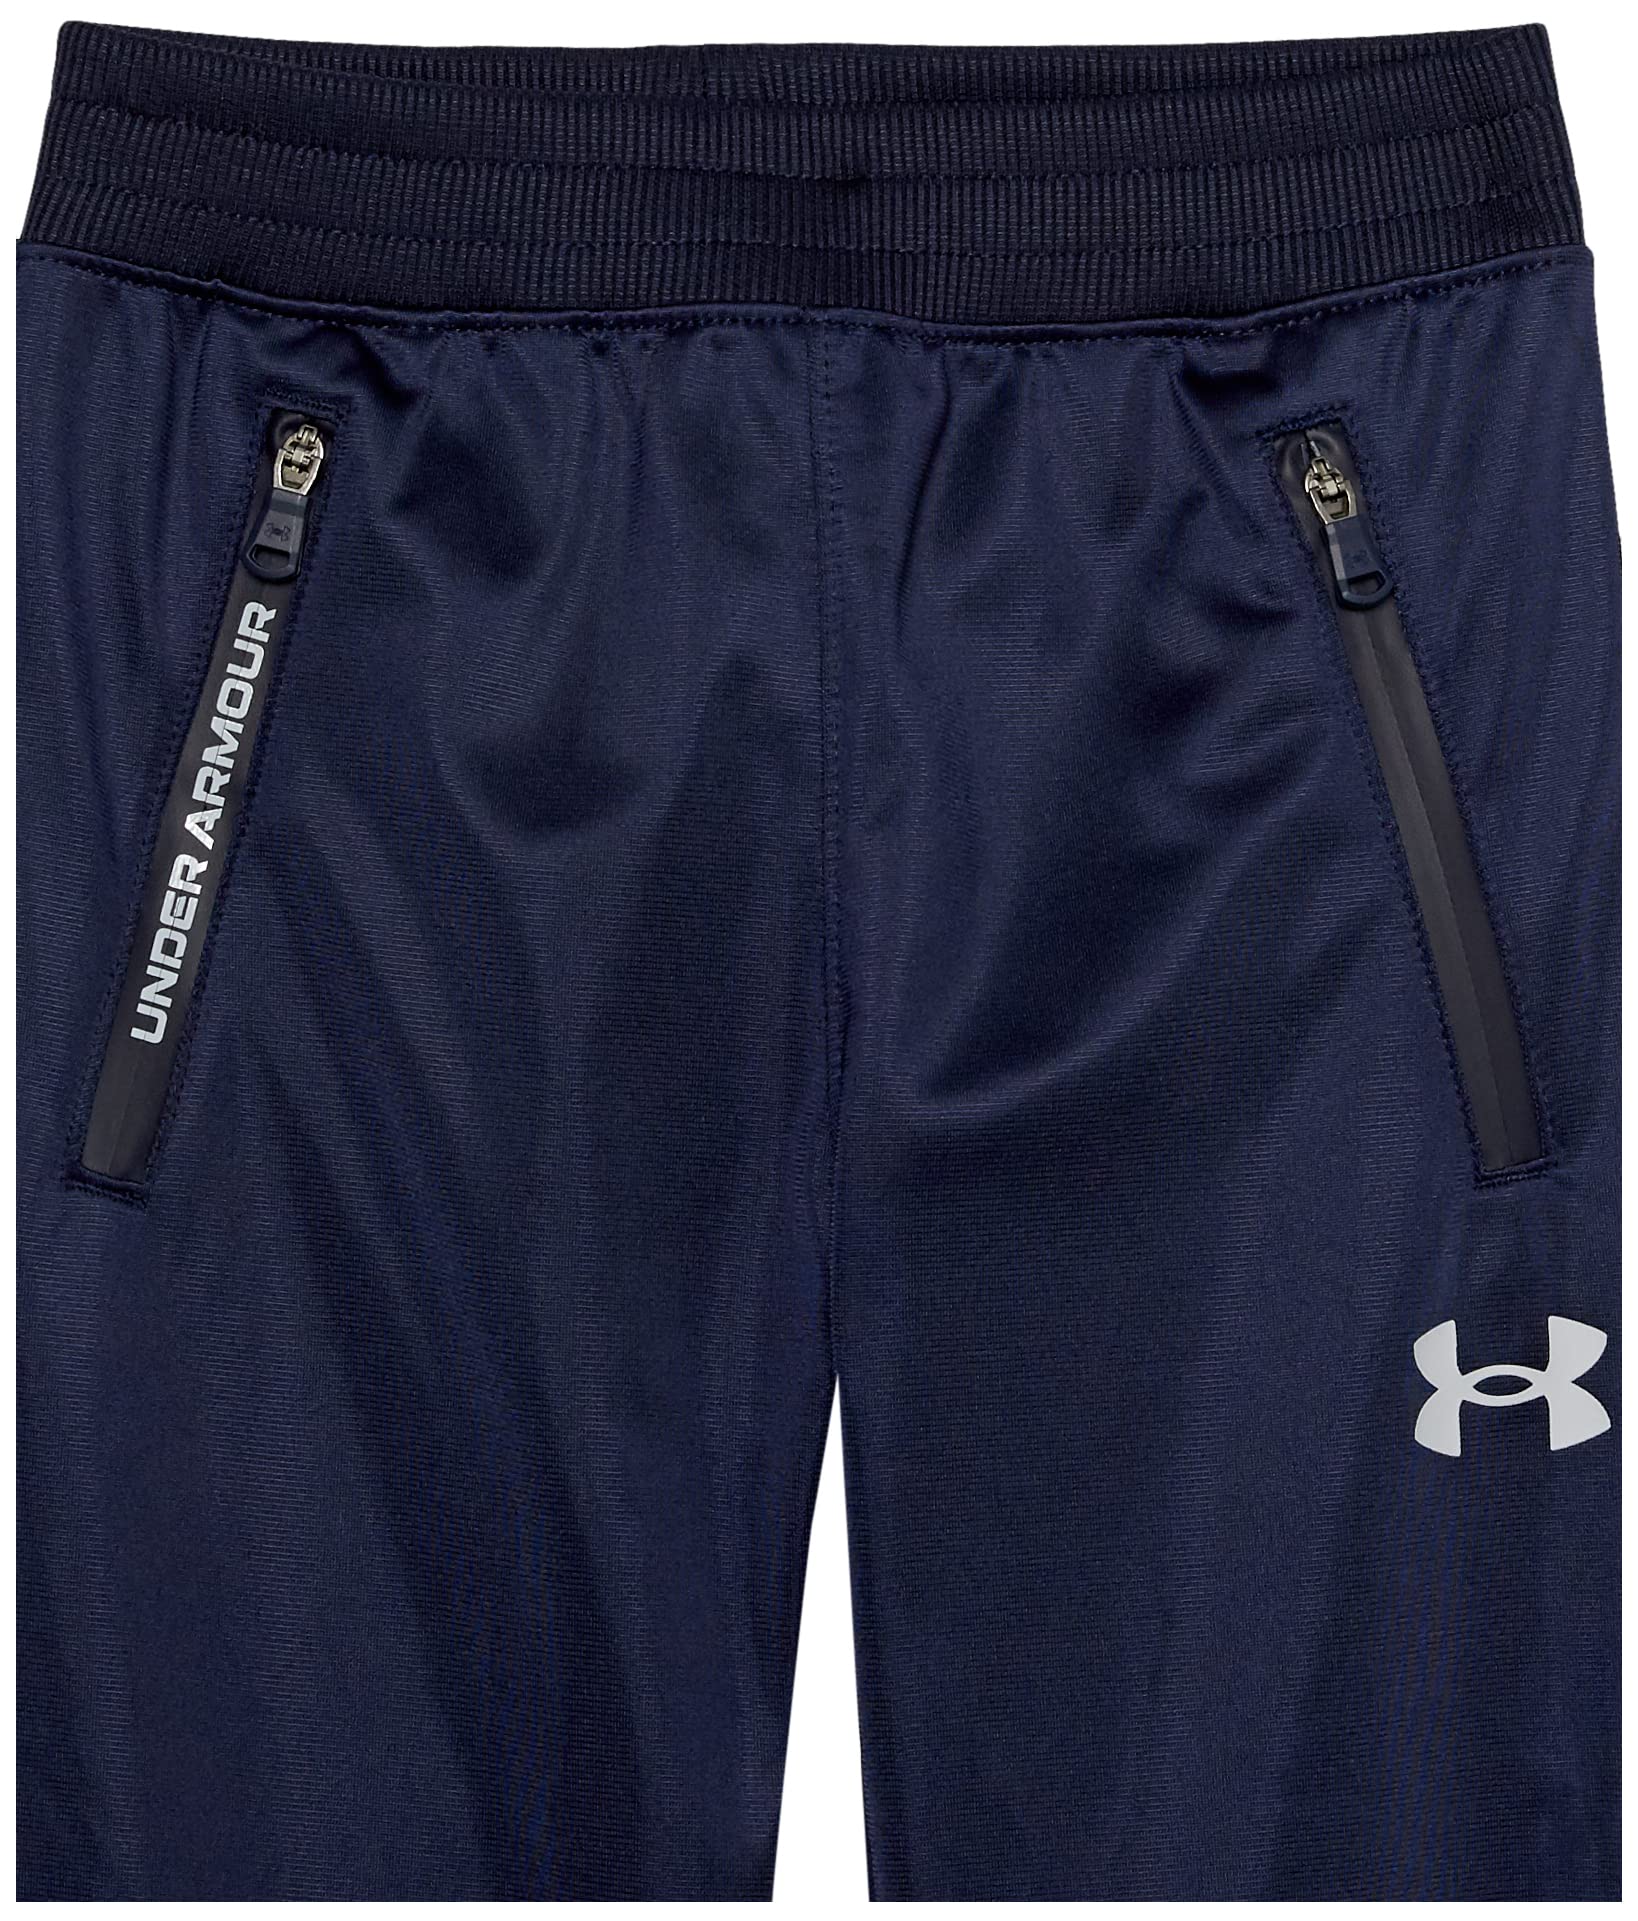 Under Armour Boys' Pennant Tapered Pant, Zipper Pockets